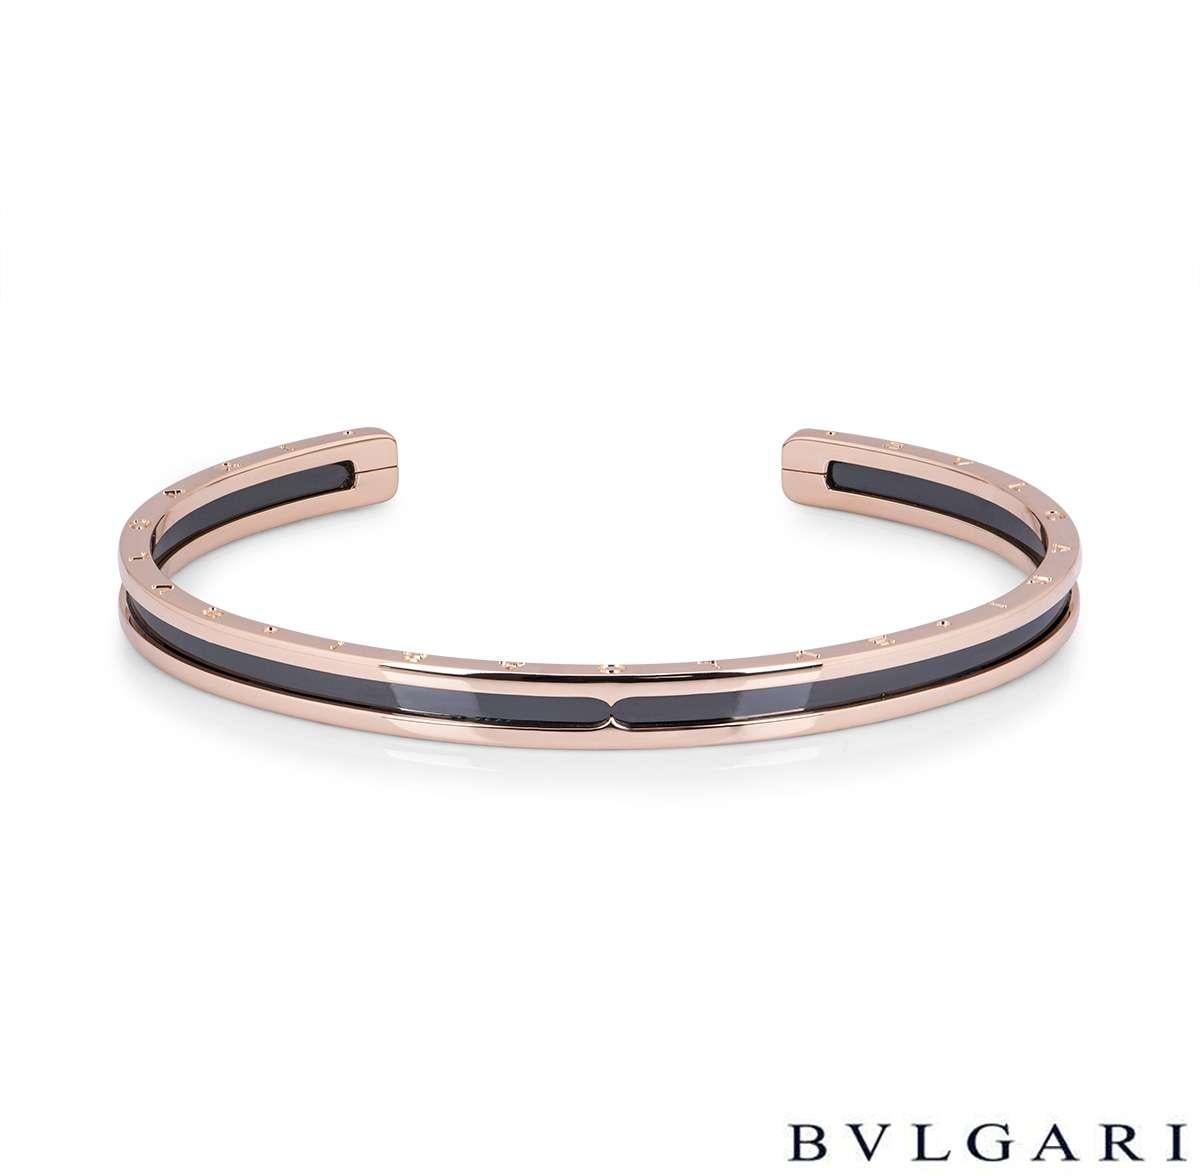 An 18k rose gold cuff bracelet by Bvlgari from the B.zero1 collection. The outer edge of the bracelet has 'Bvlgari Bvlgari' engraved on both sides and features a black ceramic middle section. The bracelet is a cuff design in size large and would fit